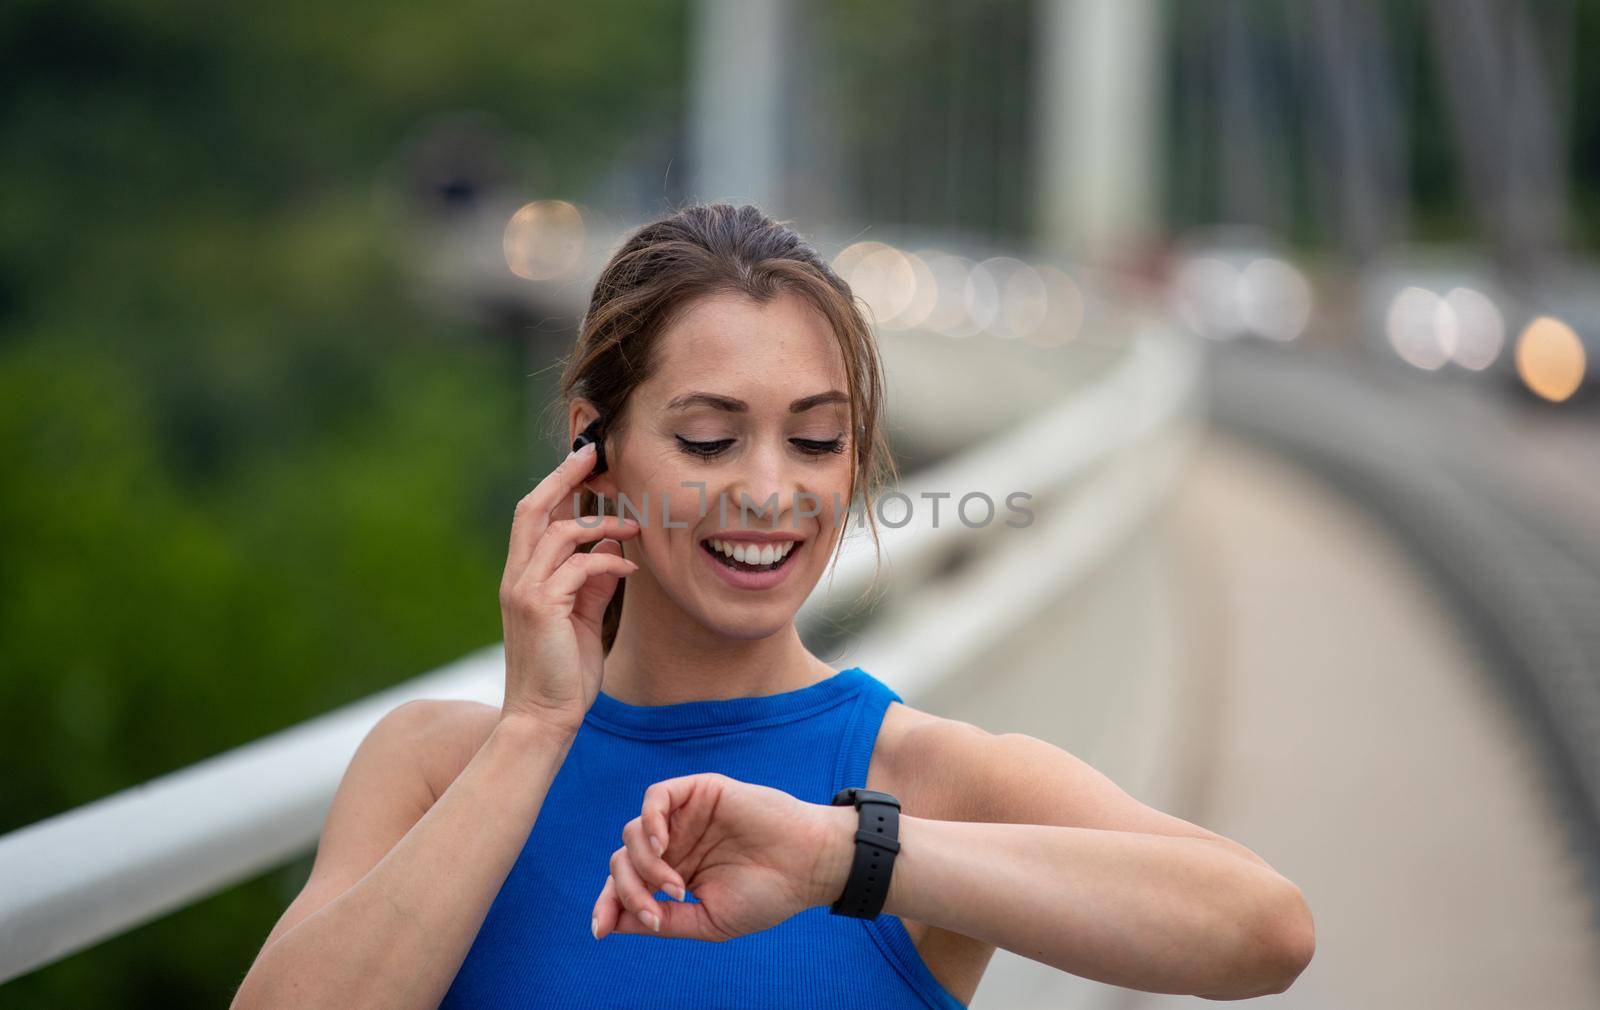 Young athlete exercising outdoors on bridge. Runner using smart watch for health data and statistics.